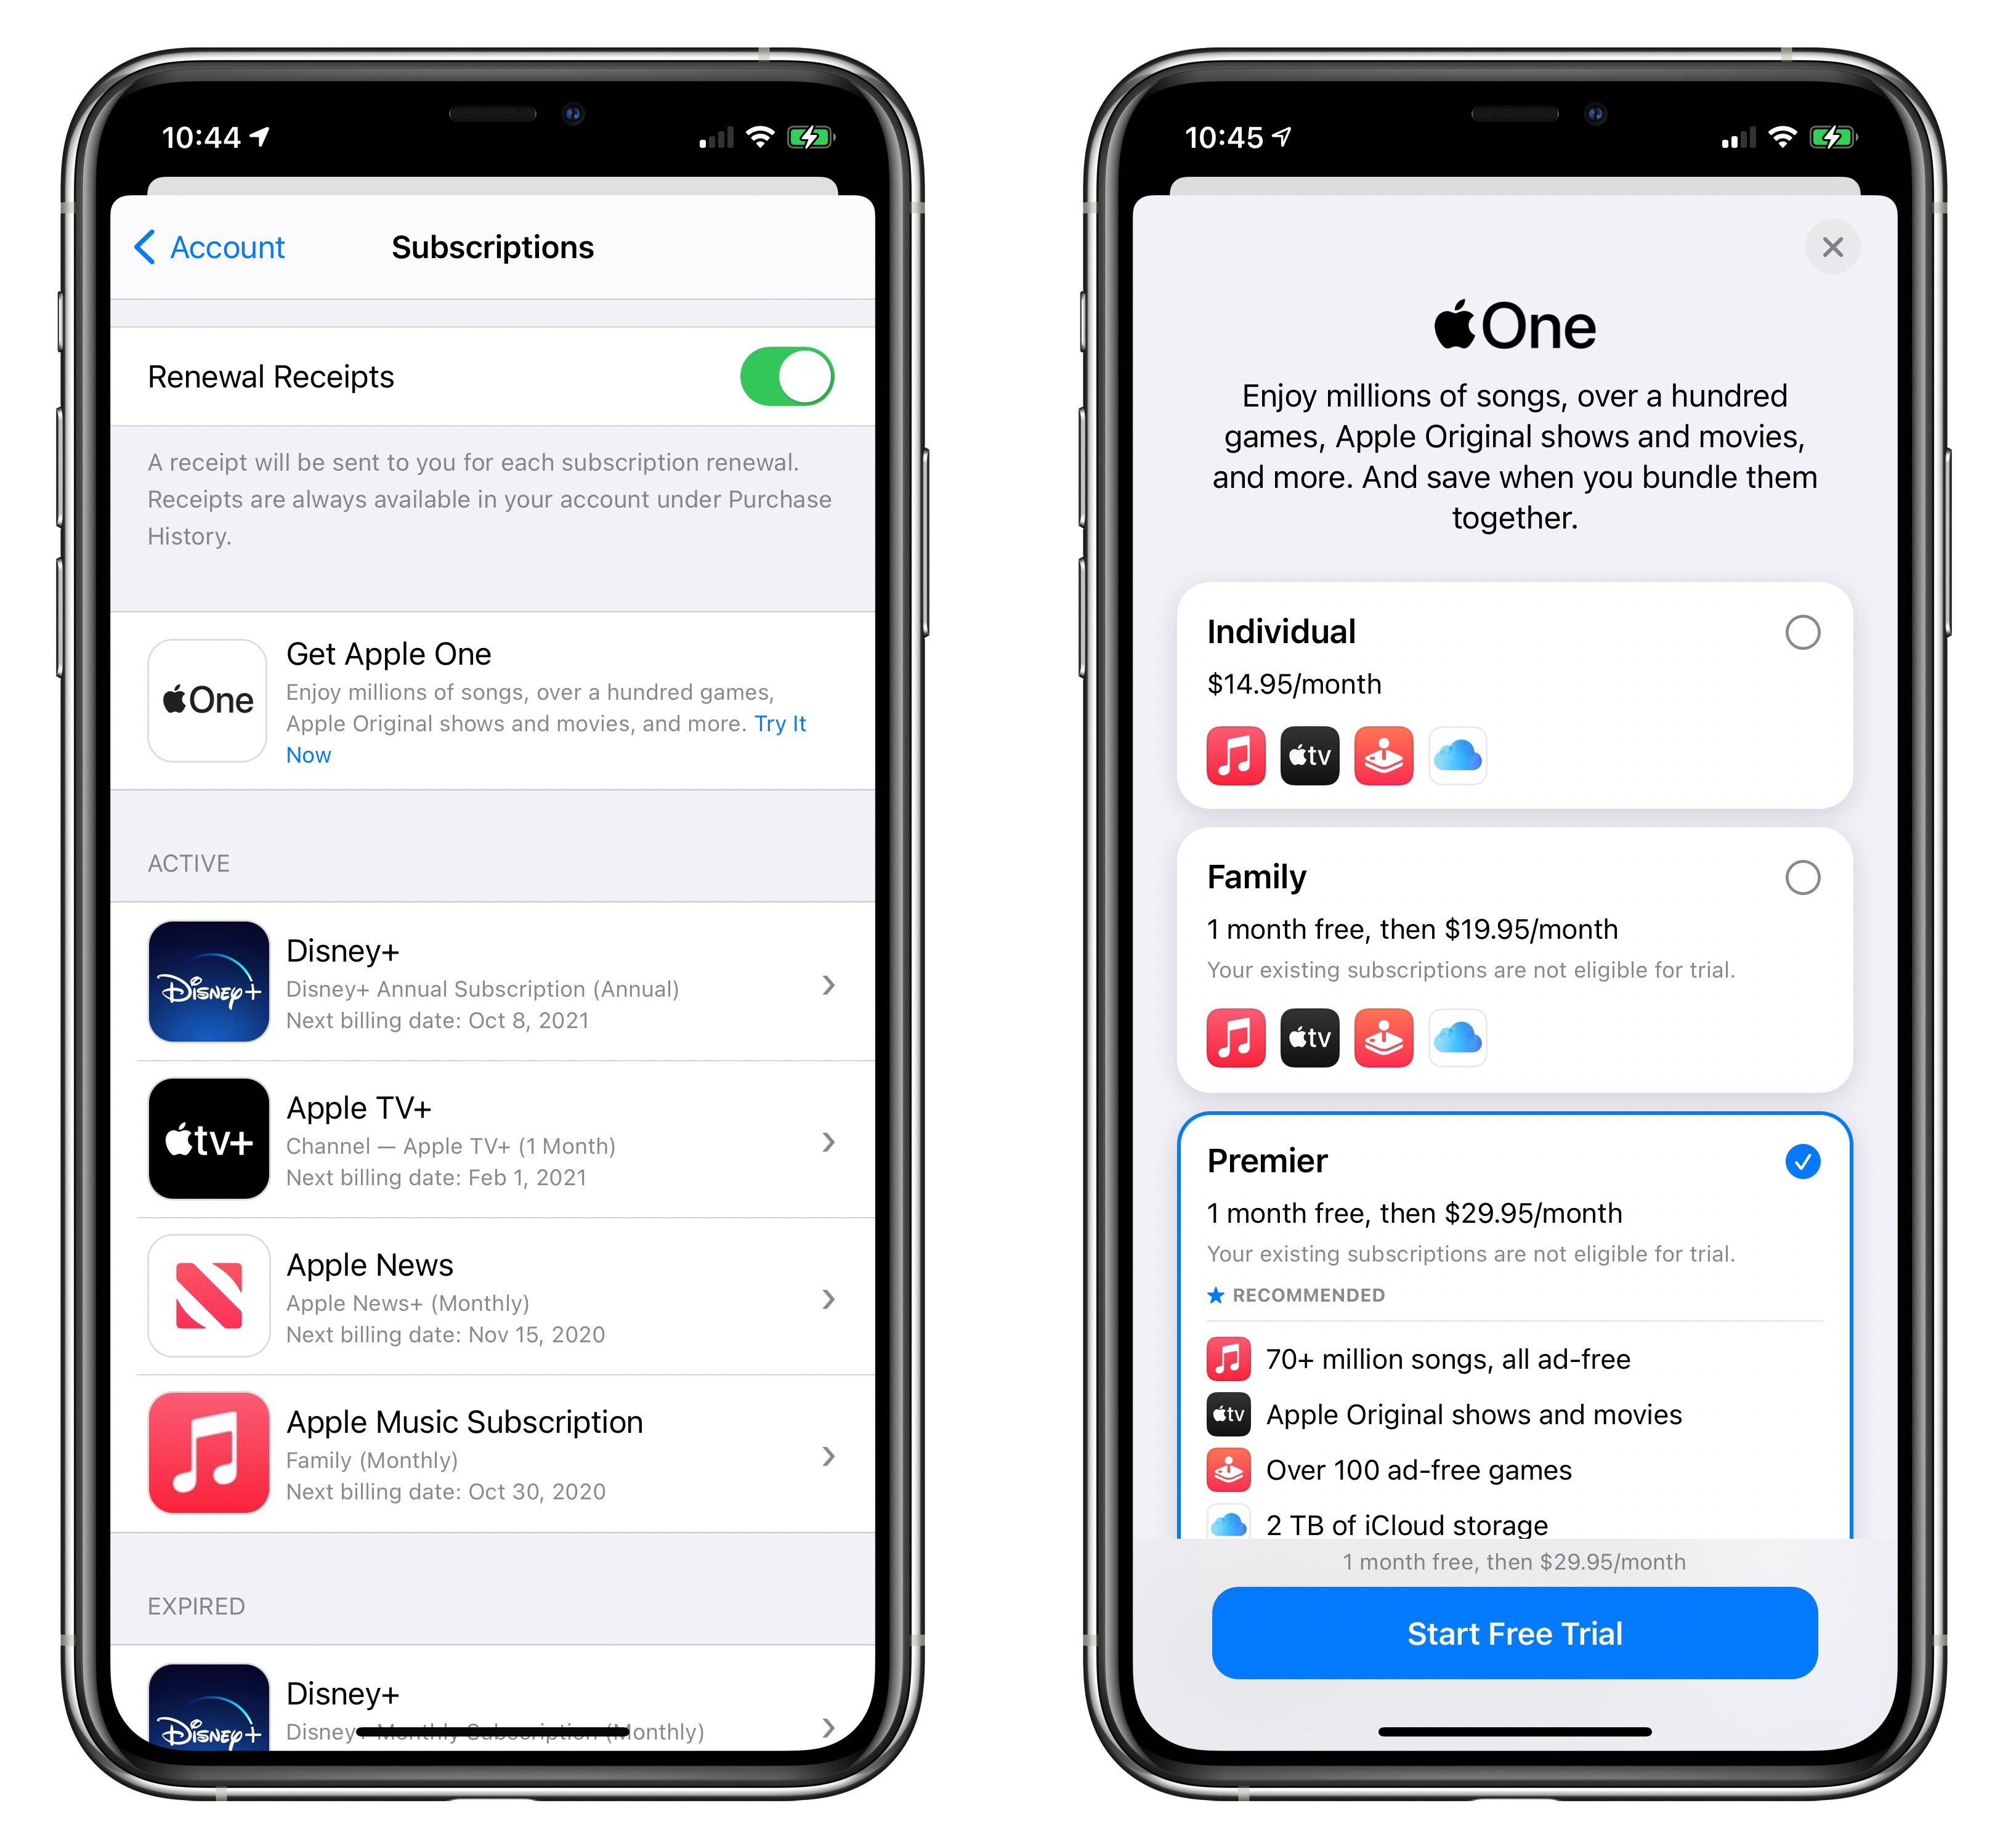 Apple One is Now Available: Save Money by Bundling Apple Music, iCloud Storage, Apple TV+, Apple Arcade, and More